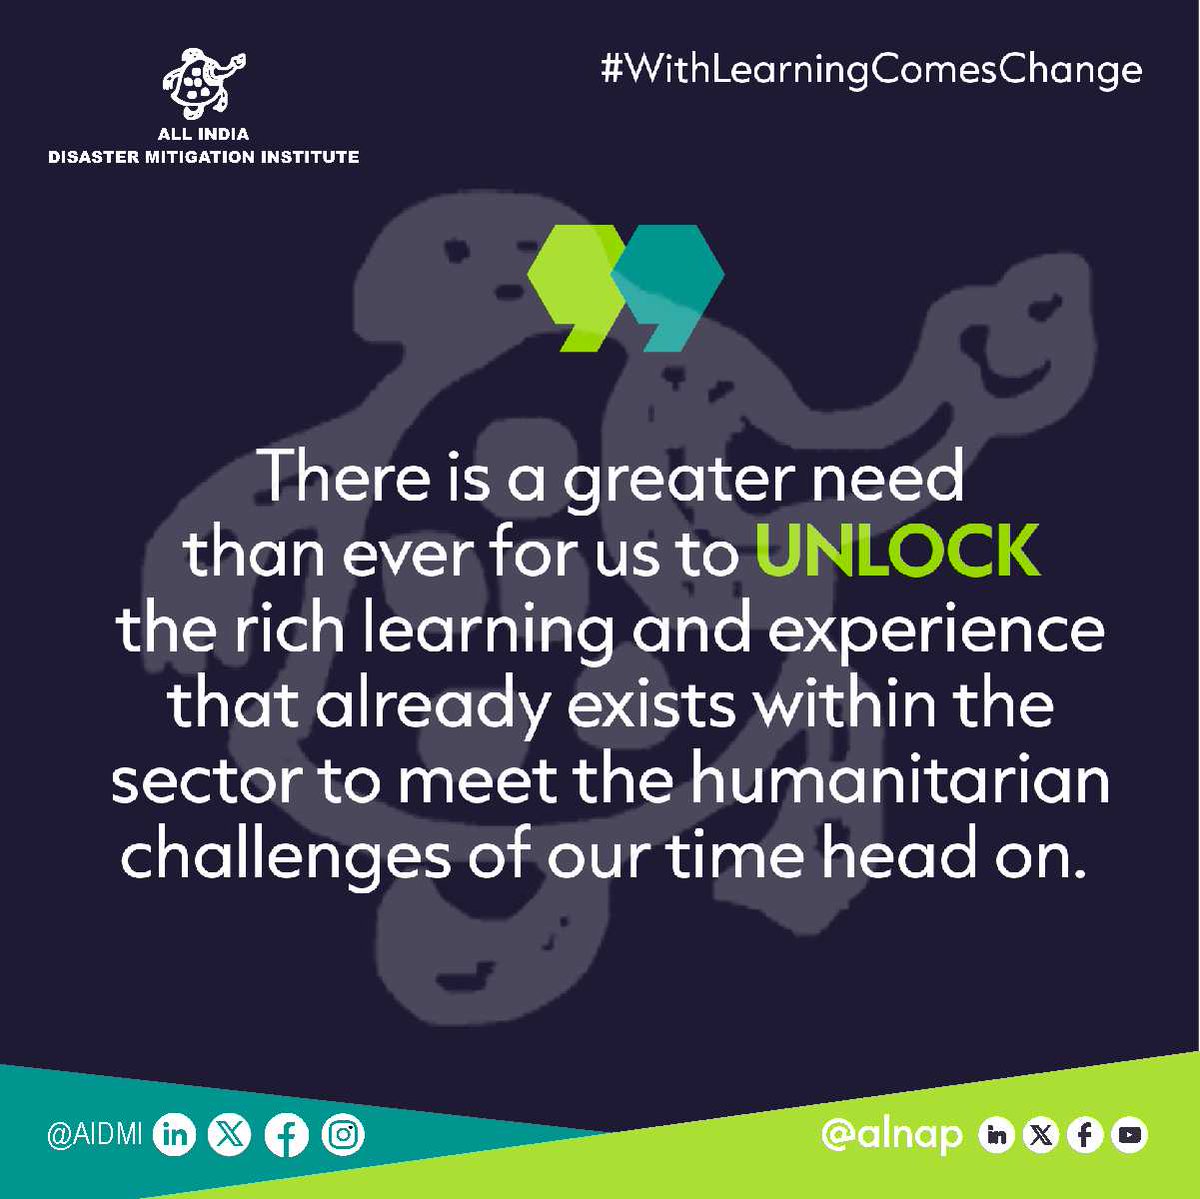 Do write to AIDMI at vishalp@aidmi.org to share your learning thoughts, learning concepts, learning tools, and learning activities.

#WithLearningComesChange
#DayForLearning
#UnlockLearning
#ALNAP
#AIDMI
#humanitarianaction
#transformation